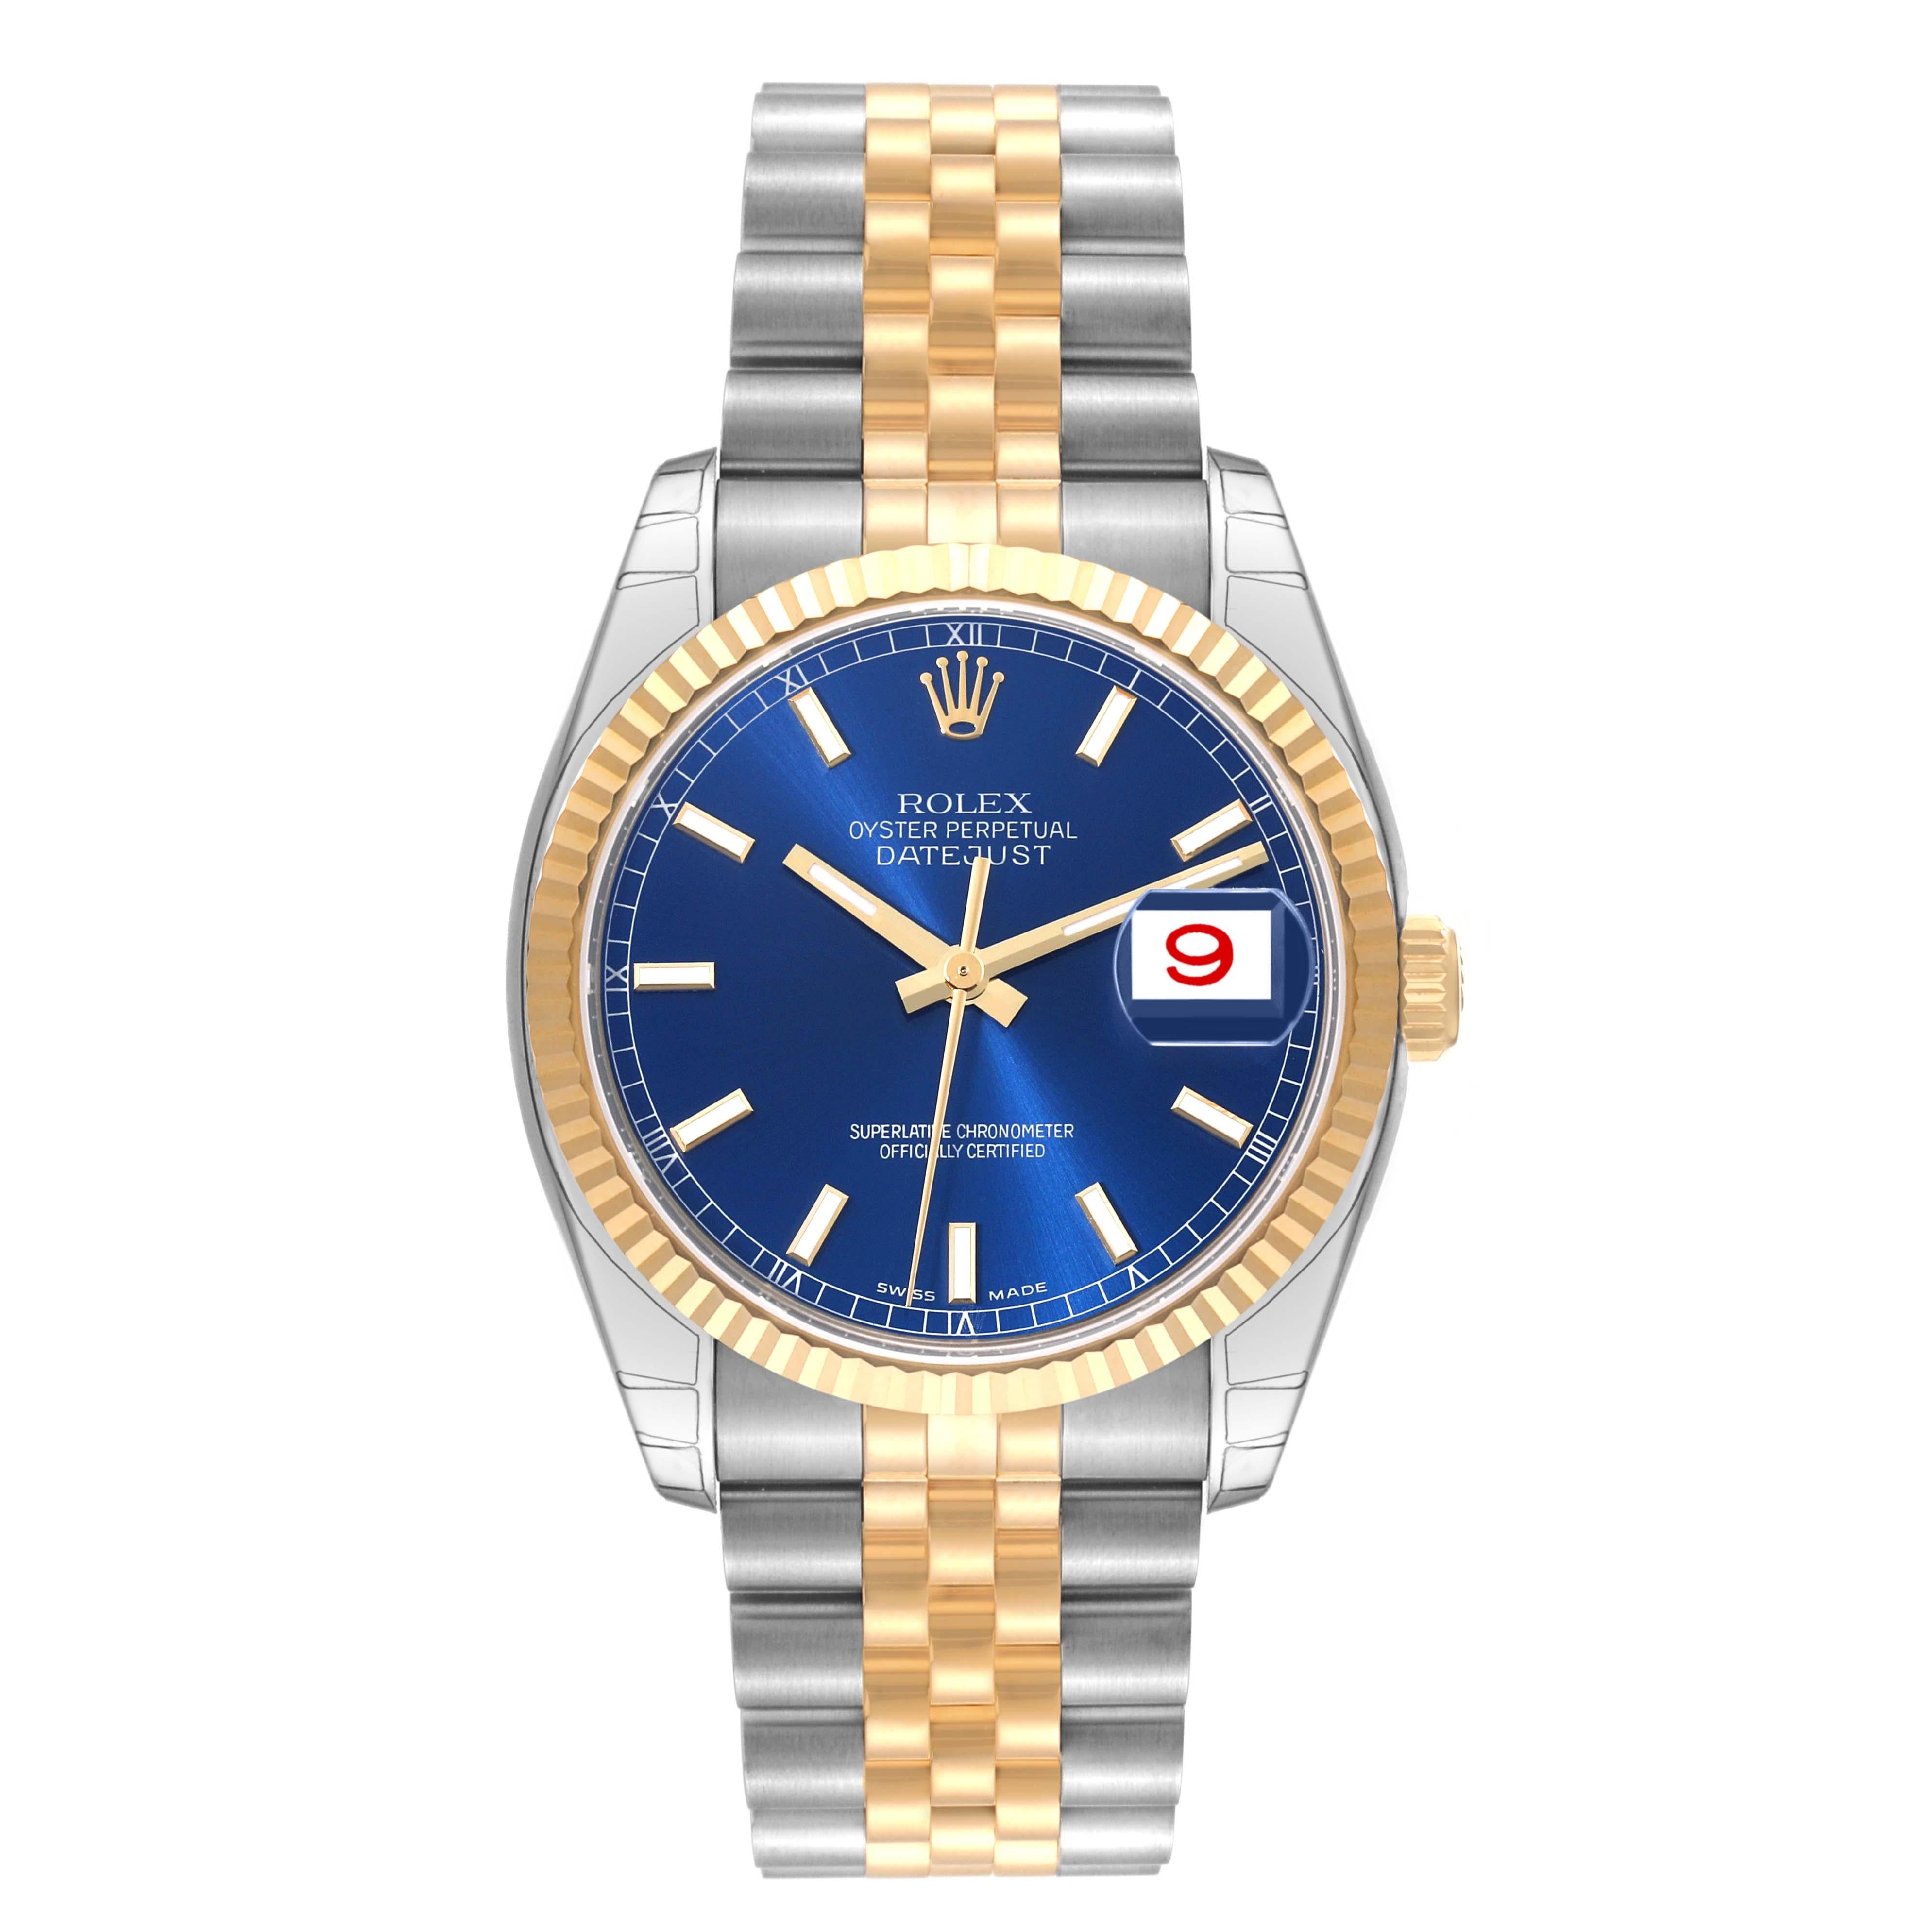 Rolex Datejust Steel Yellow Gold Blue Dial Mens Watch 116233 Box Papers For Sale 2